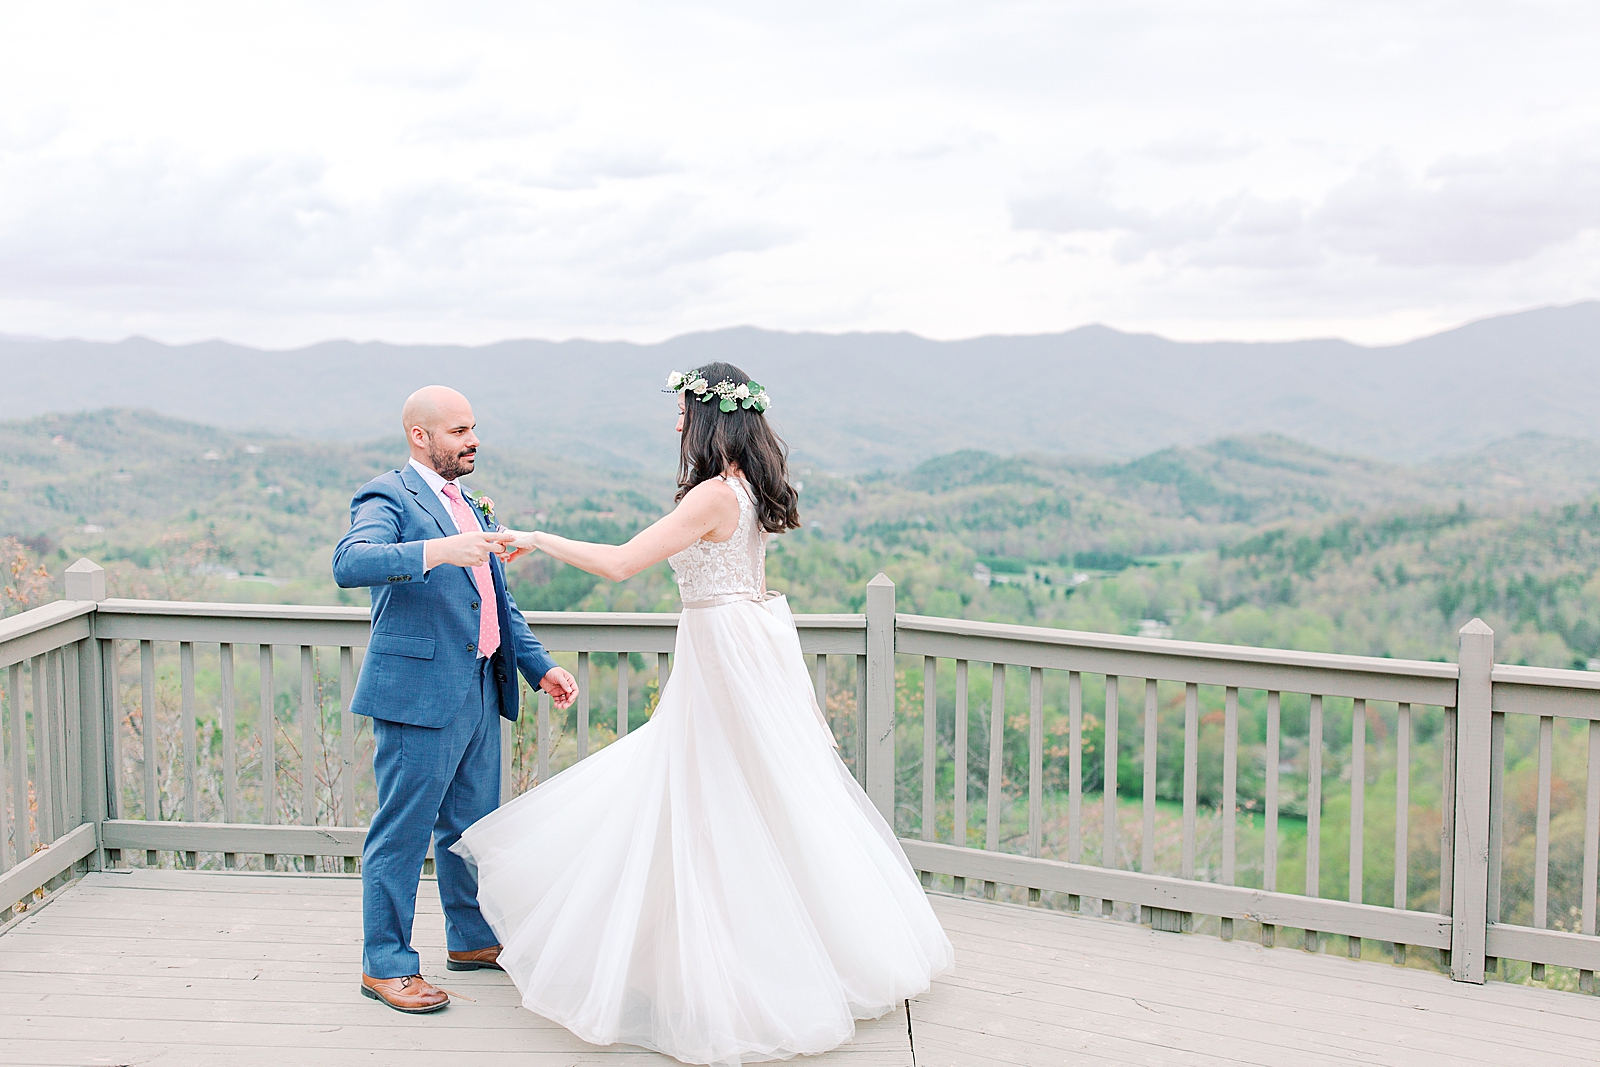 Spring Hawkesdene Wedding Groom twirling bride with mountains in background Photo